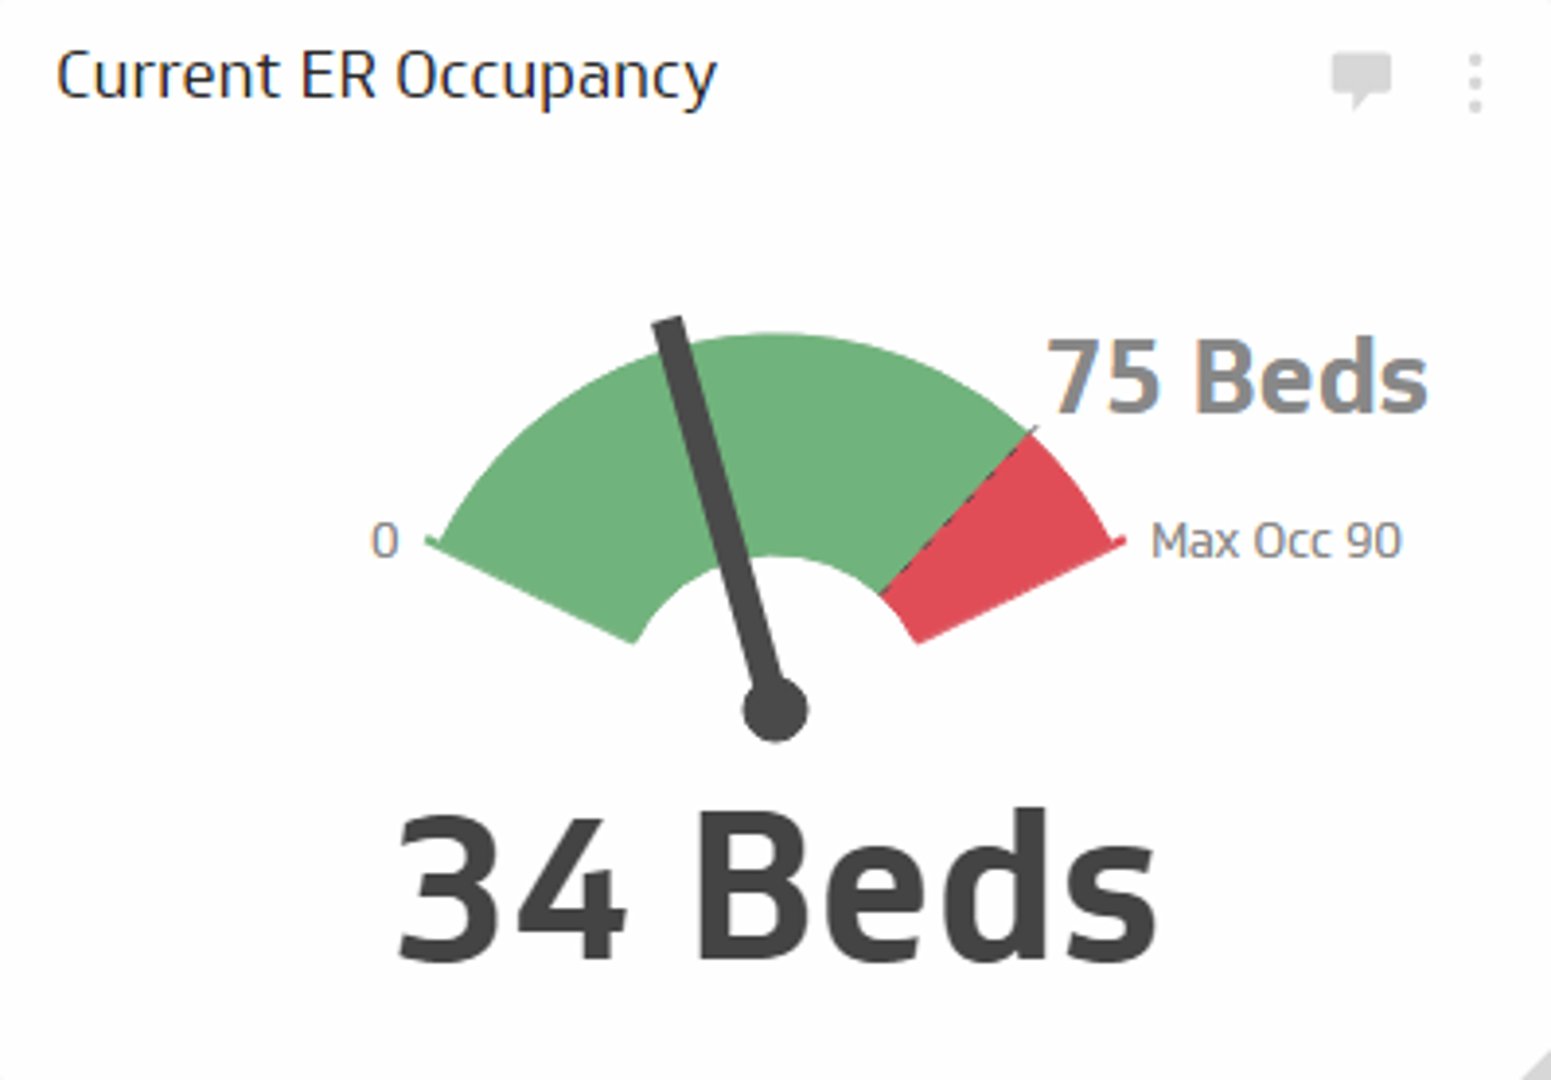 Healthcare KPI Examples - Current ER Occupancy Metric